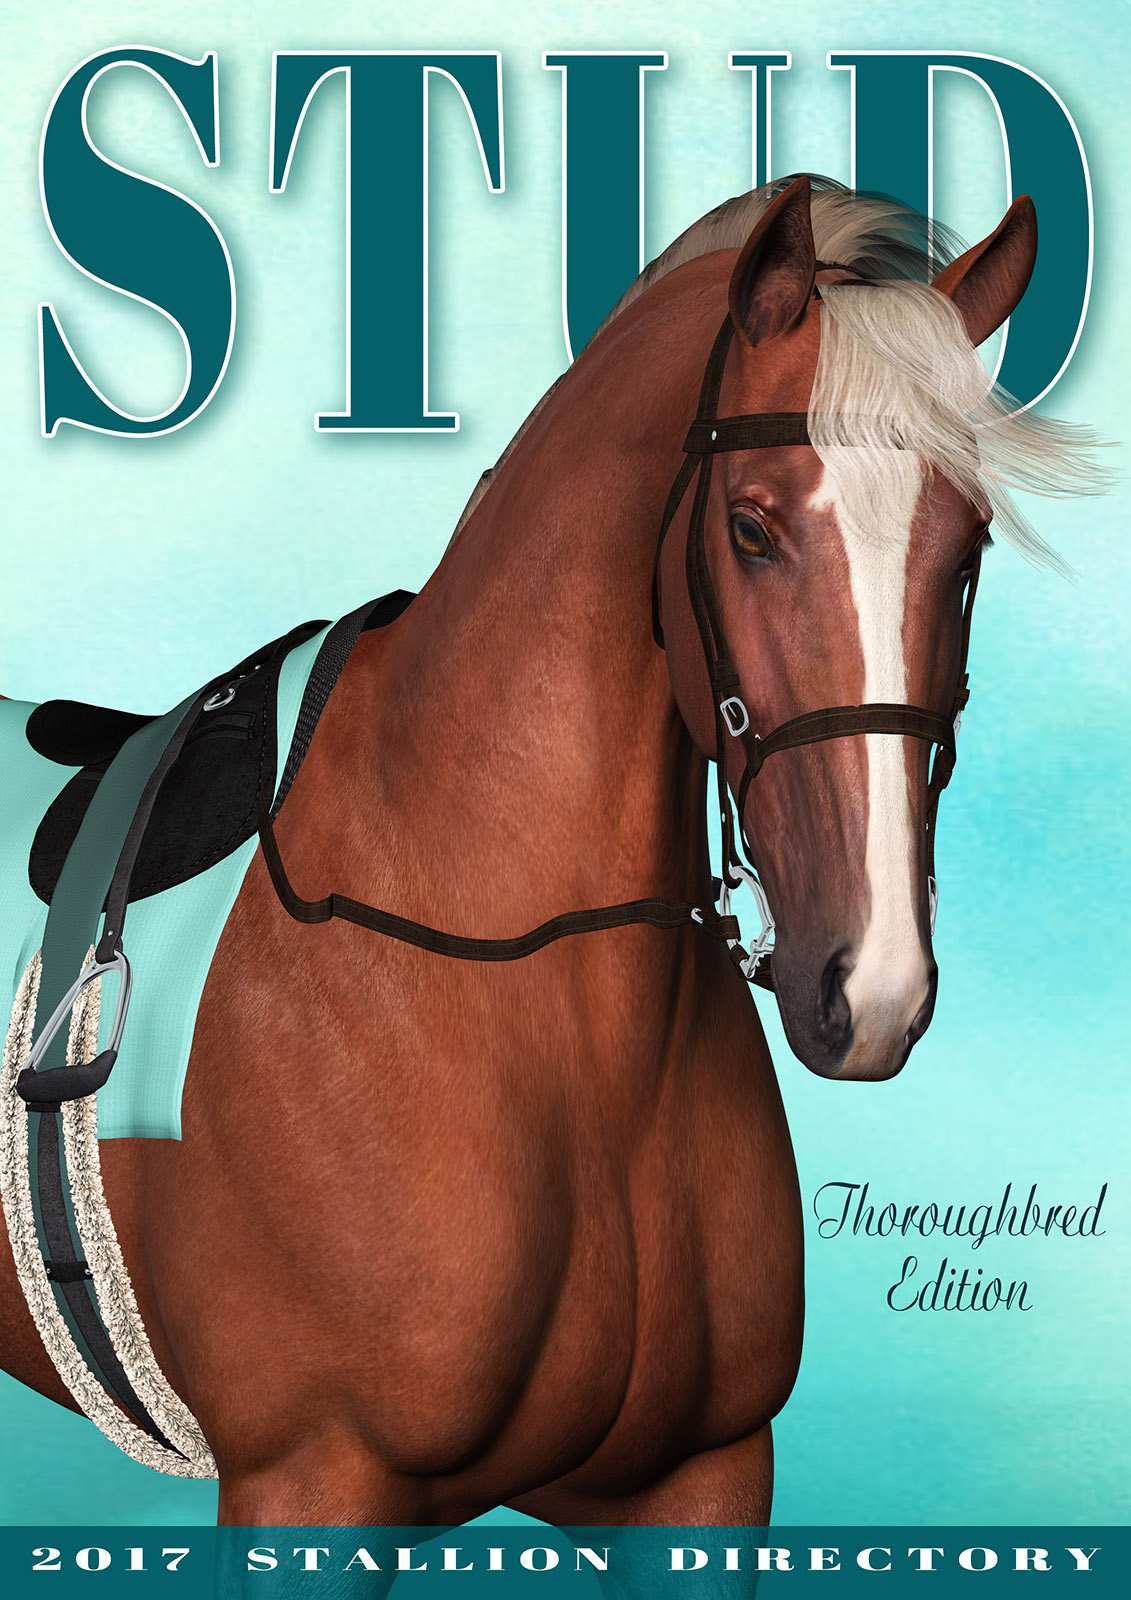 Magazine Cover - Stallion Directory - Thoroughbred Edition